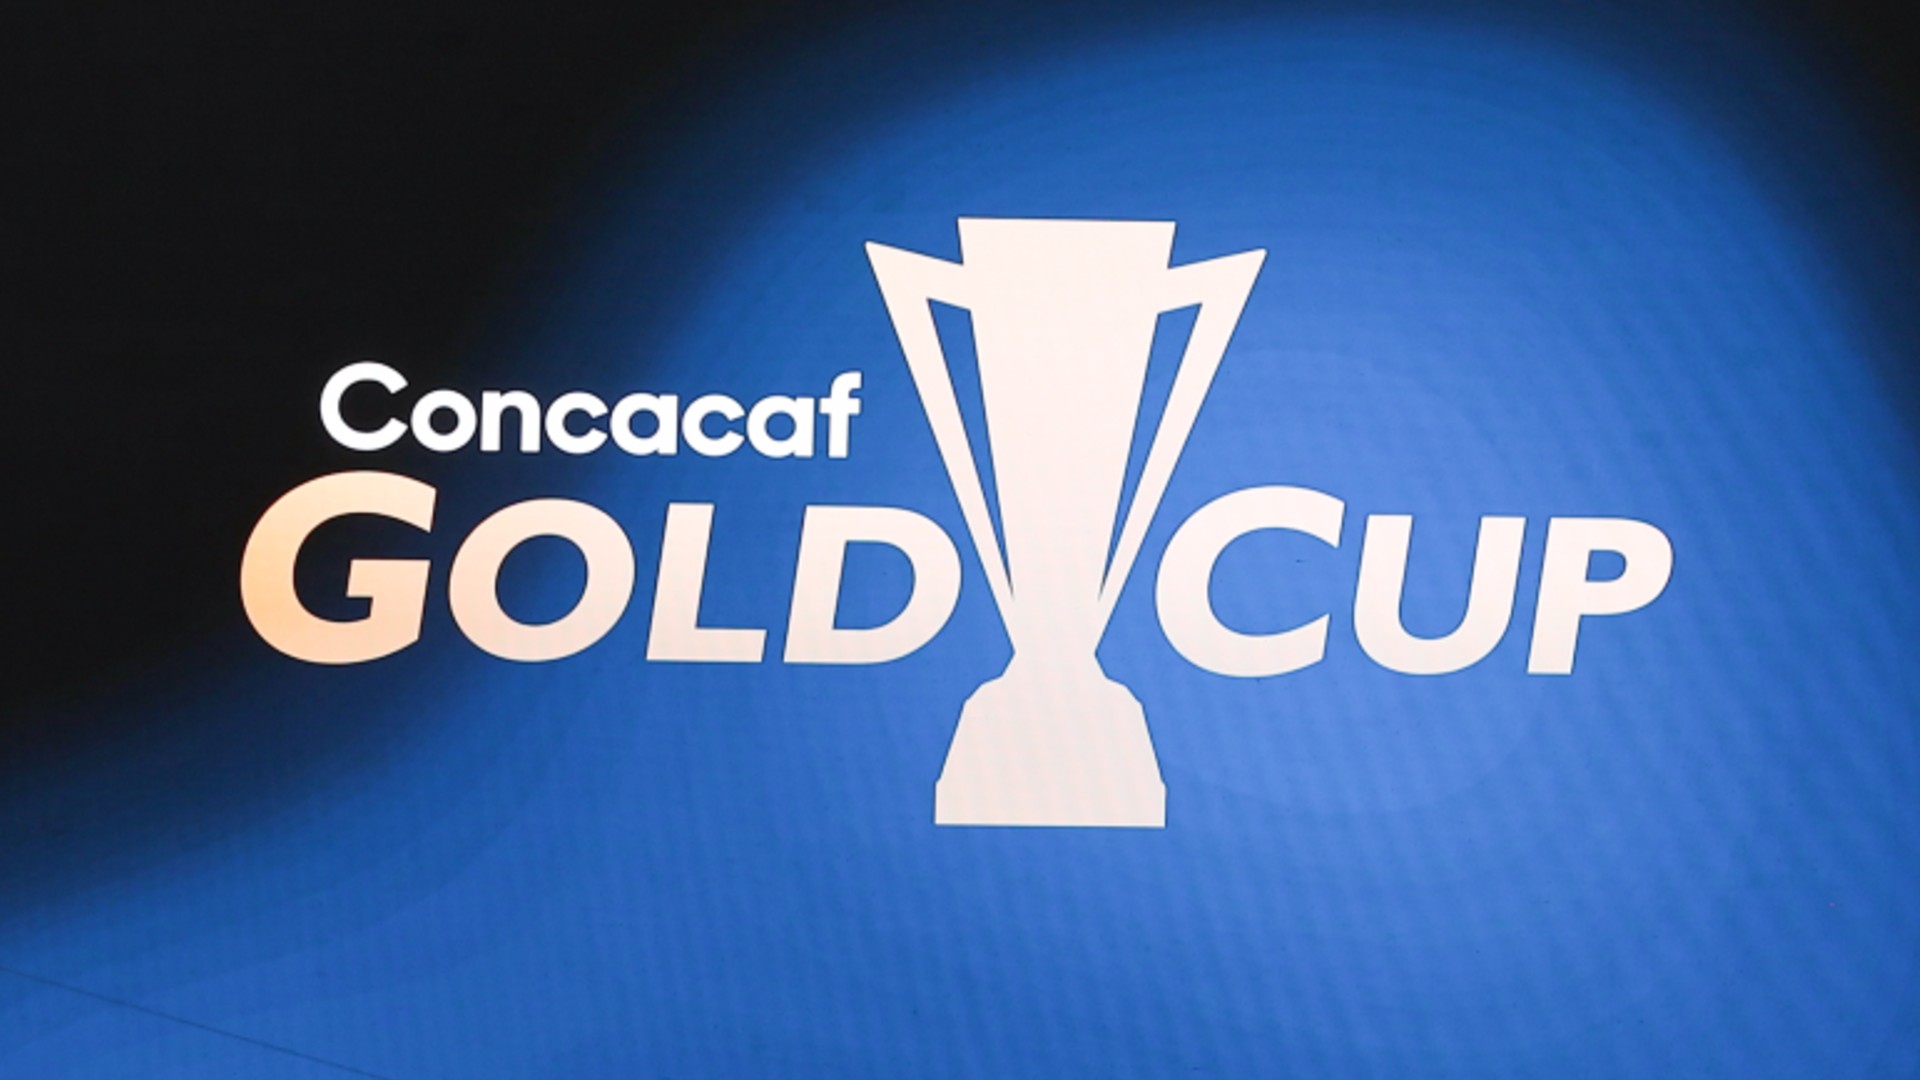 CONCACAF Gold Cup schedule 2021: Complete dates, times, TV channels to watch every game in USA